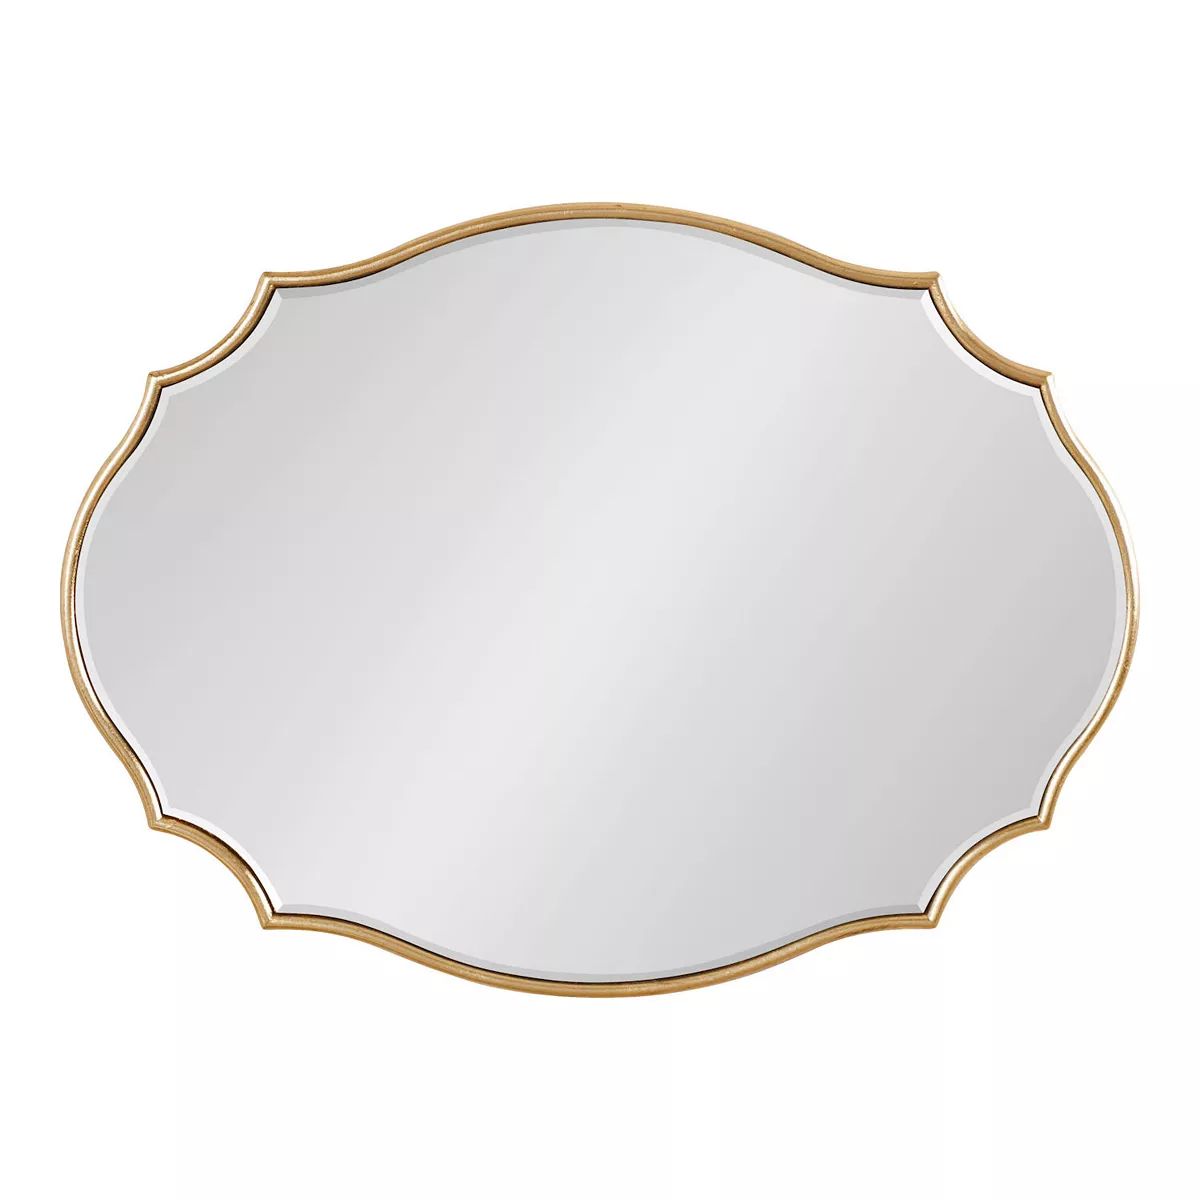 Kate and Laurel Leanna Scalloped Oval Wall Mirror | Kohl's